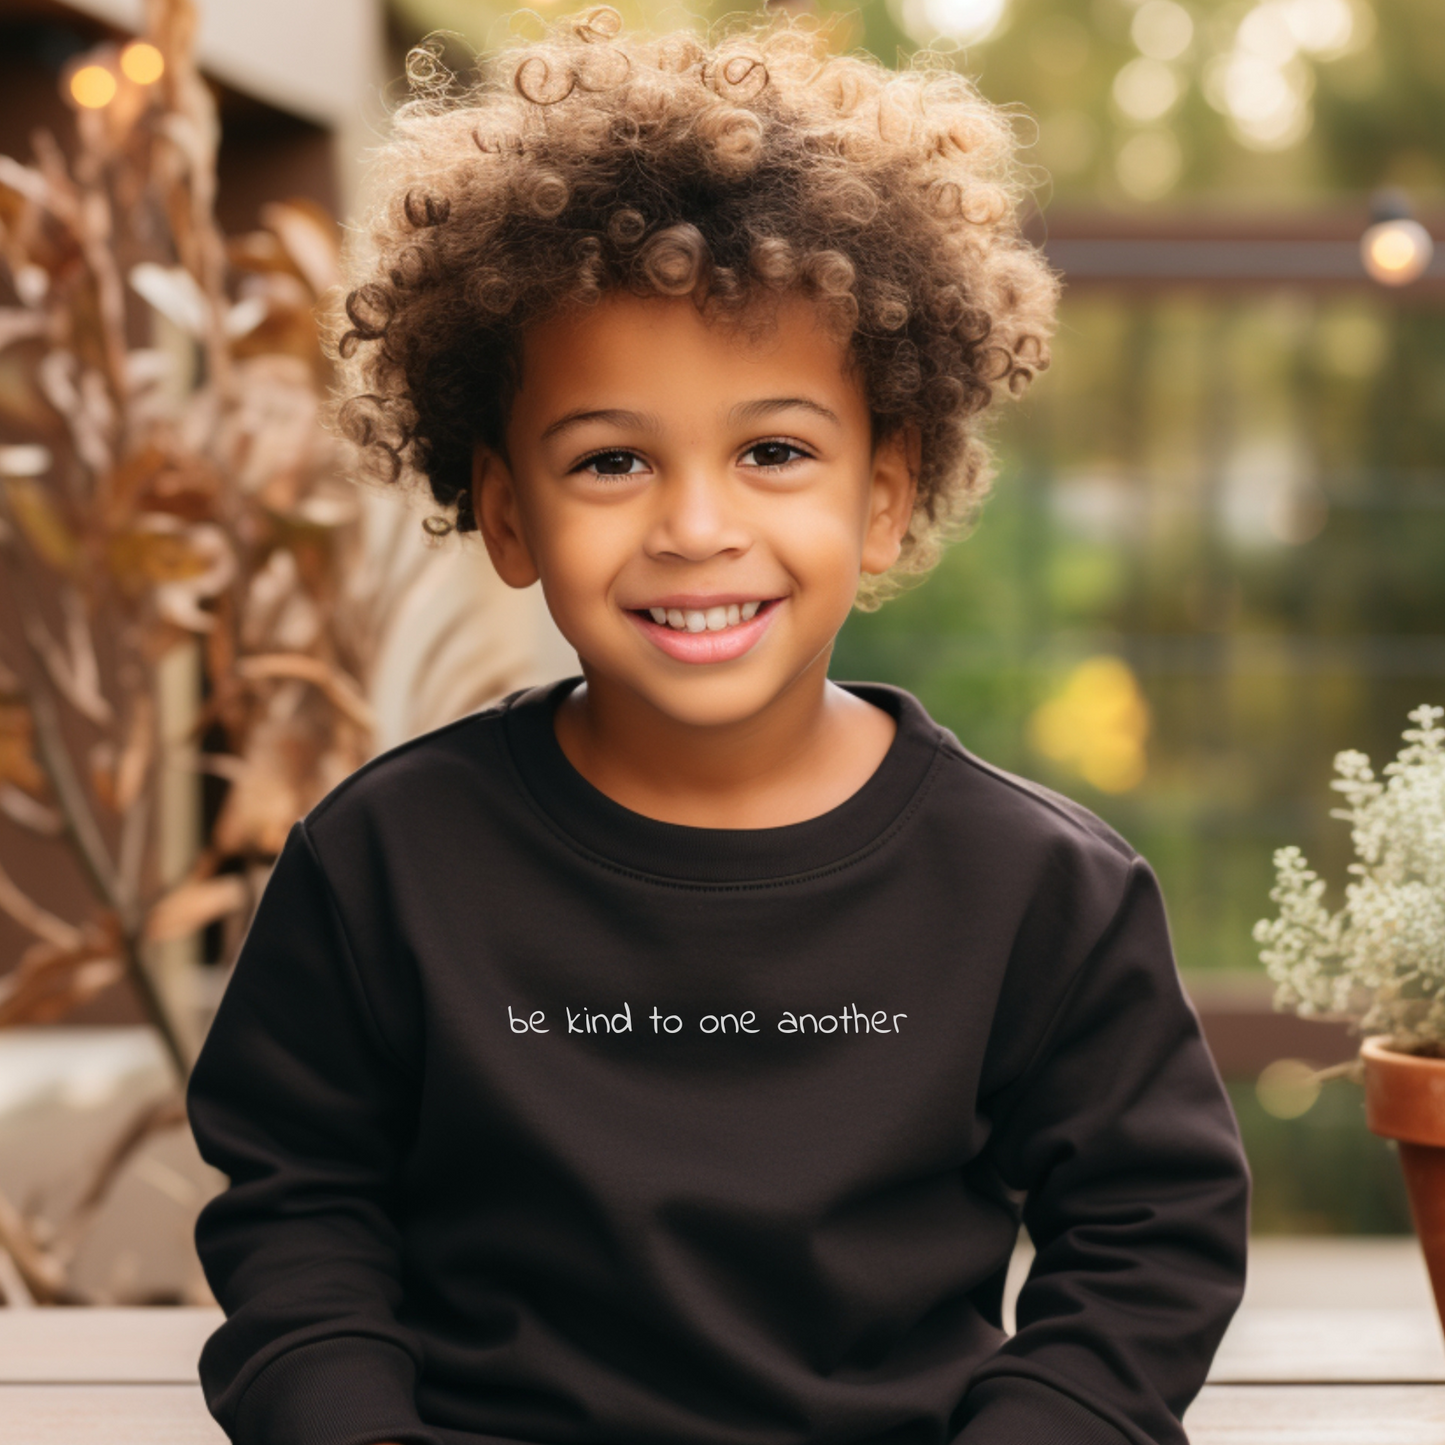 Be Kind to one another Toddler Sweatshirt